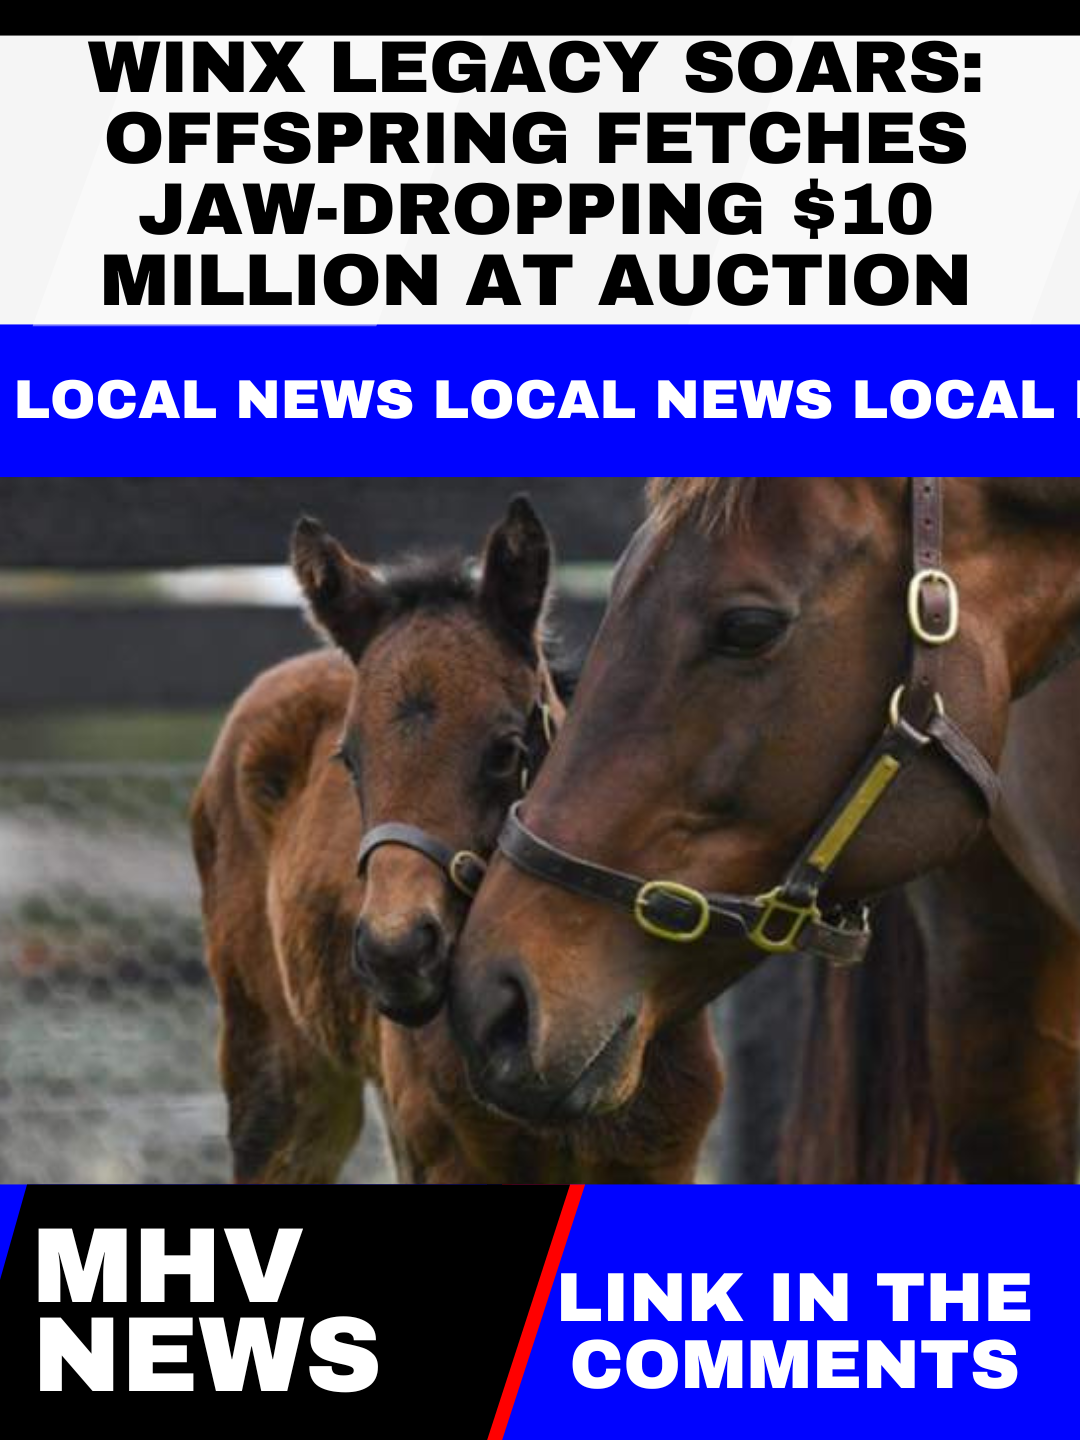 Read more about the article WINX Legacy Soars: Offspring Fetches Jaw-Dropping $10 Million at Auction